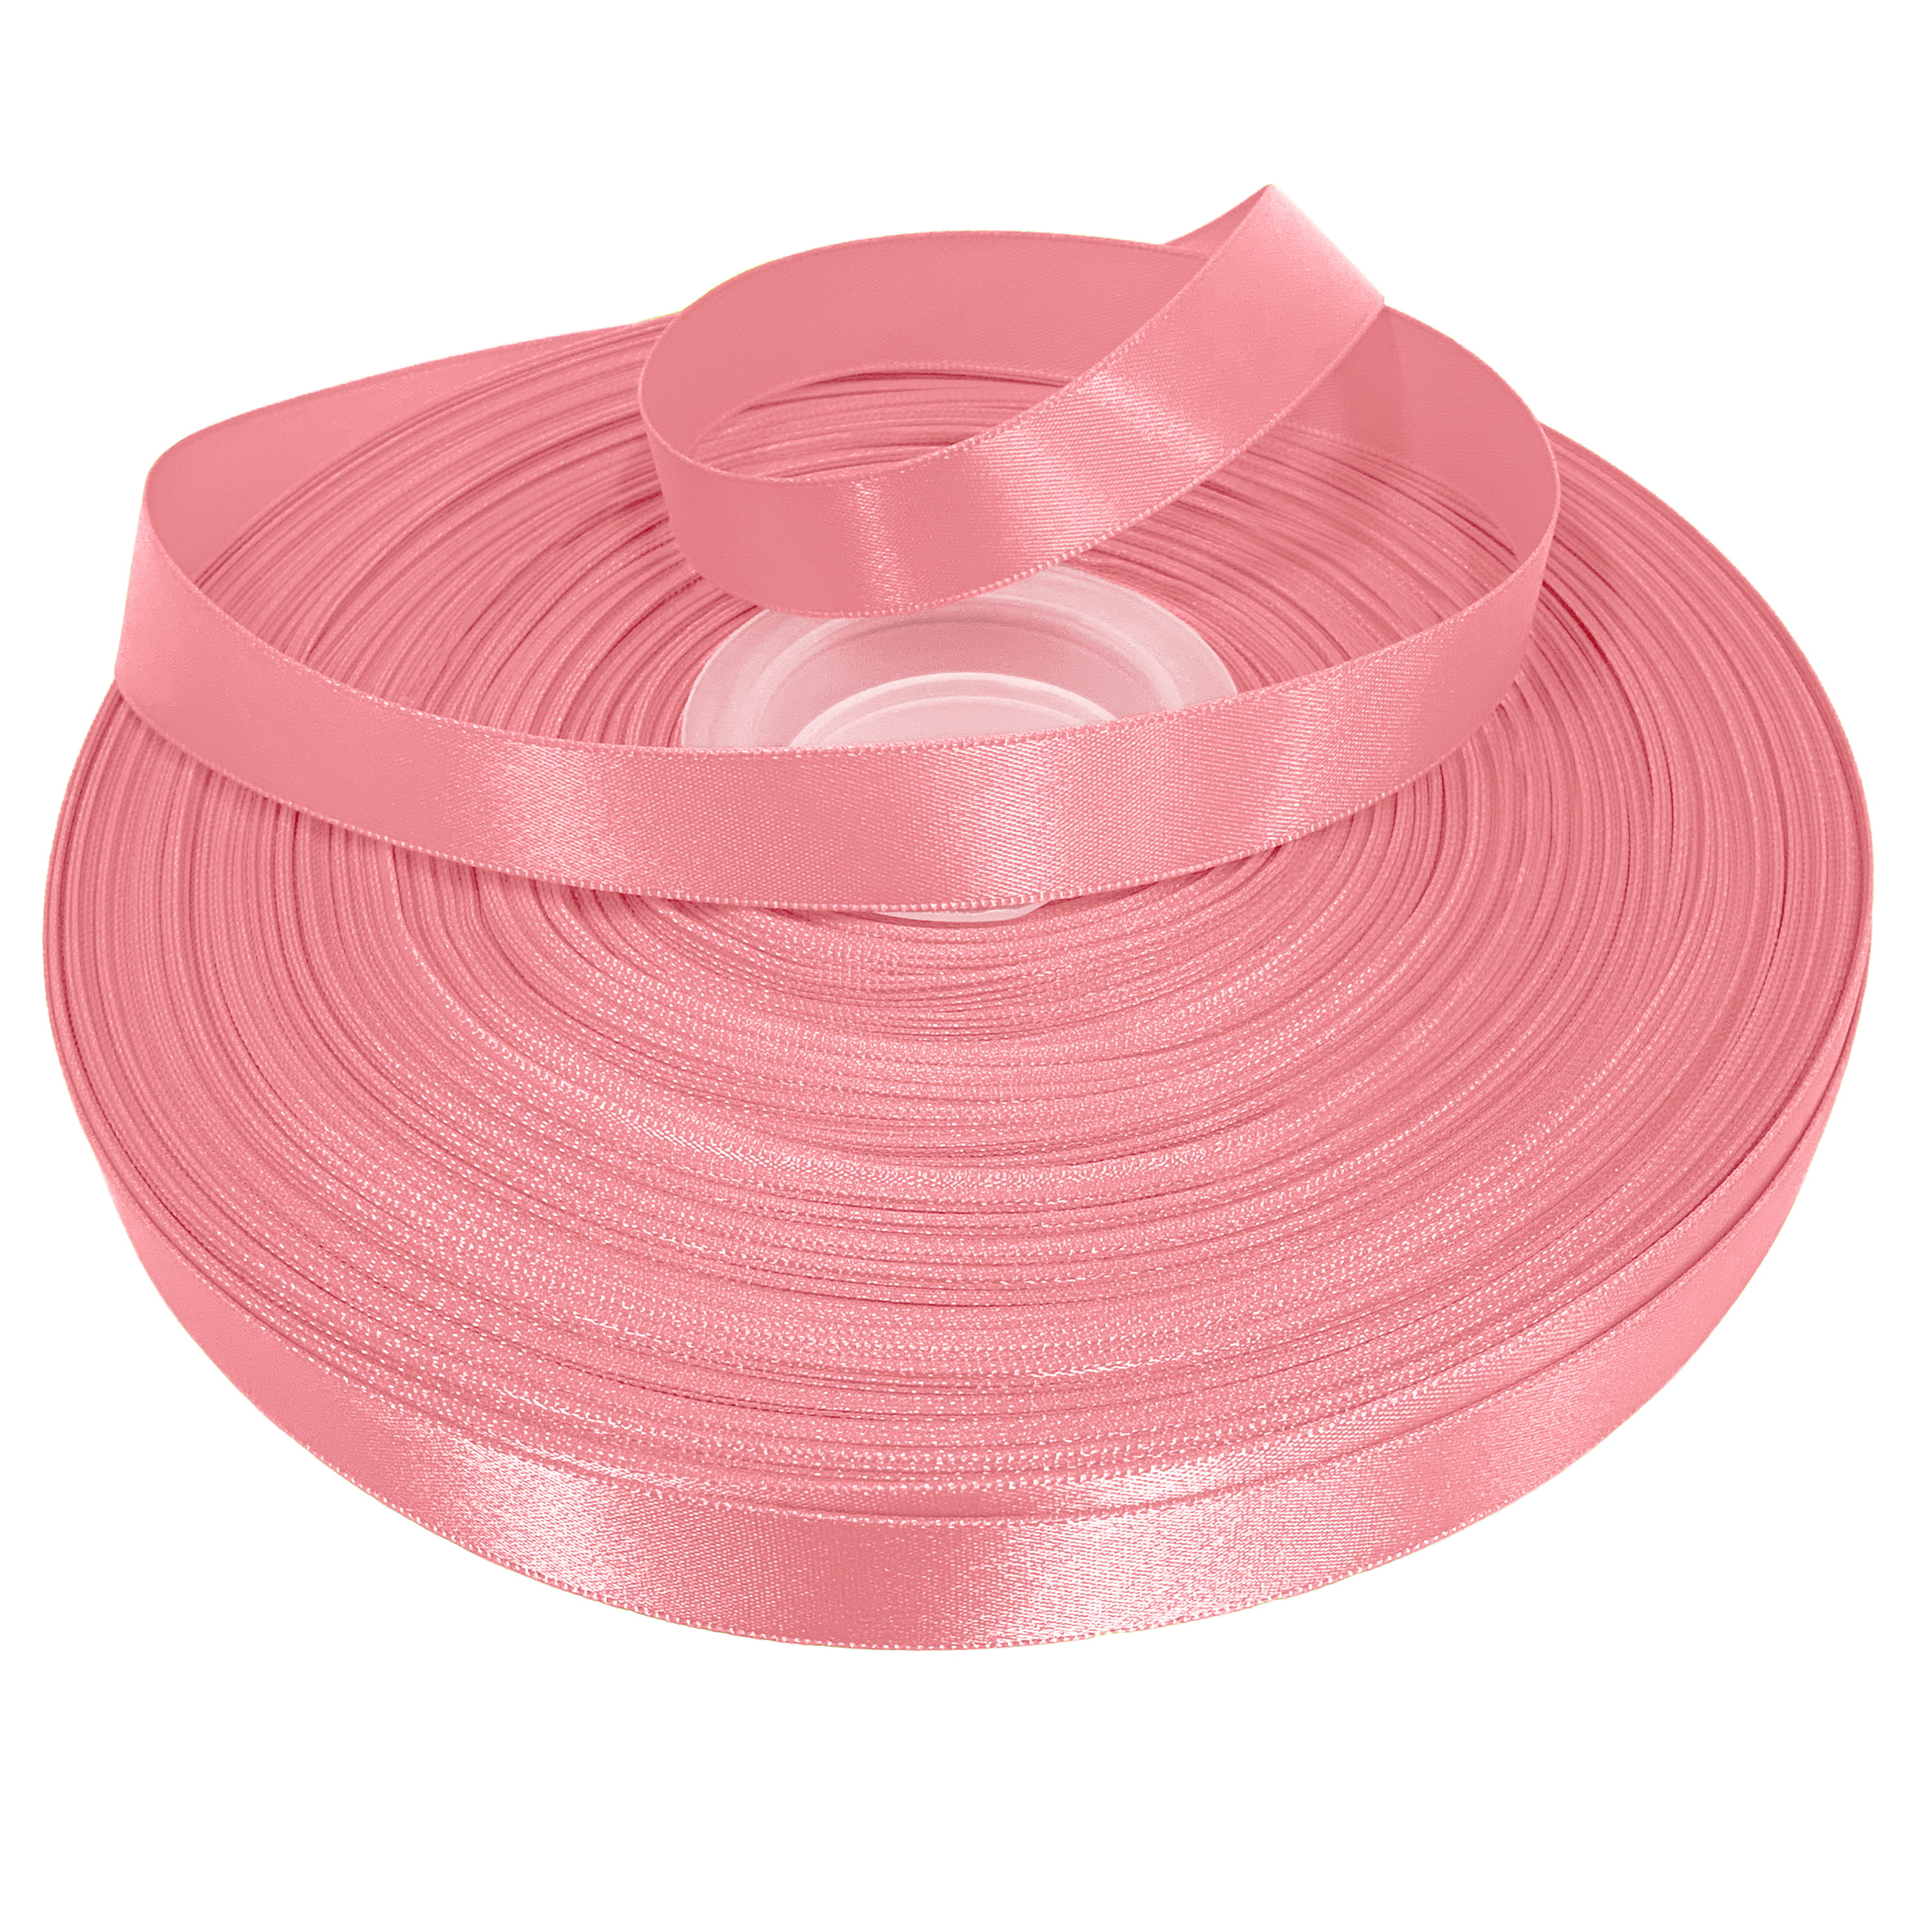  Capesaro Pink Ribbon - Solid Color Satin Ribbon,1/8 inch x 100  Yards Double Face Gift Ribbon for Crafts : Health & Household